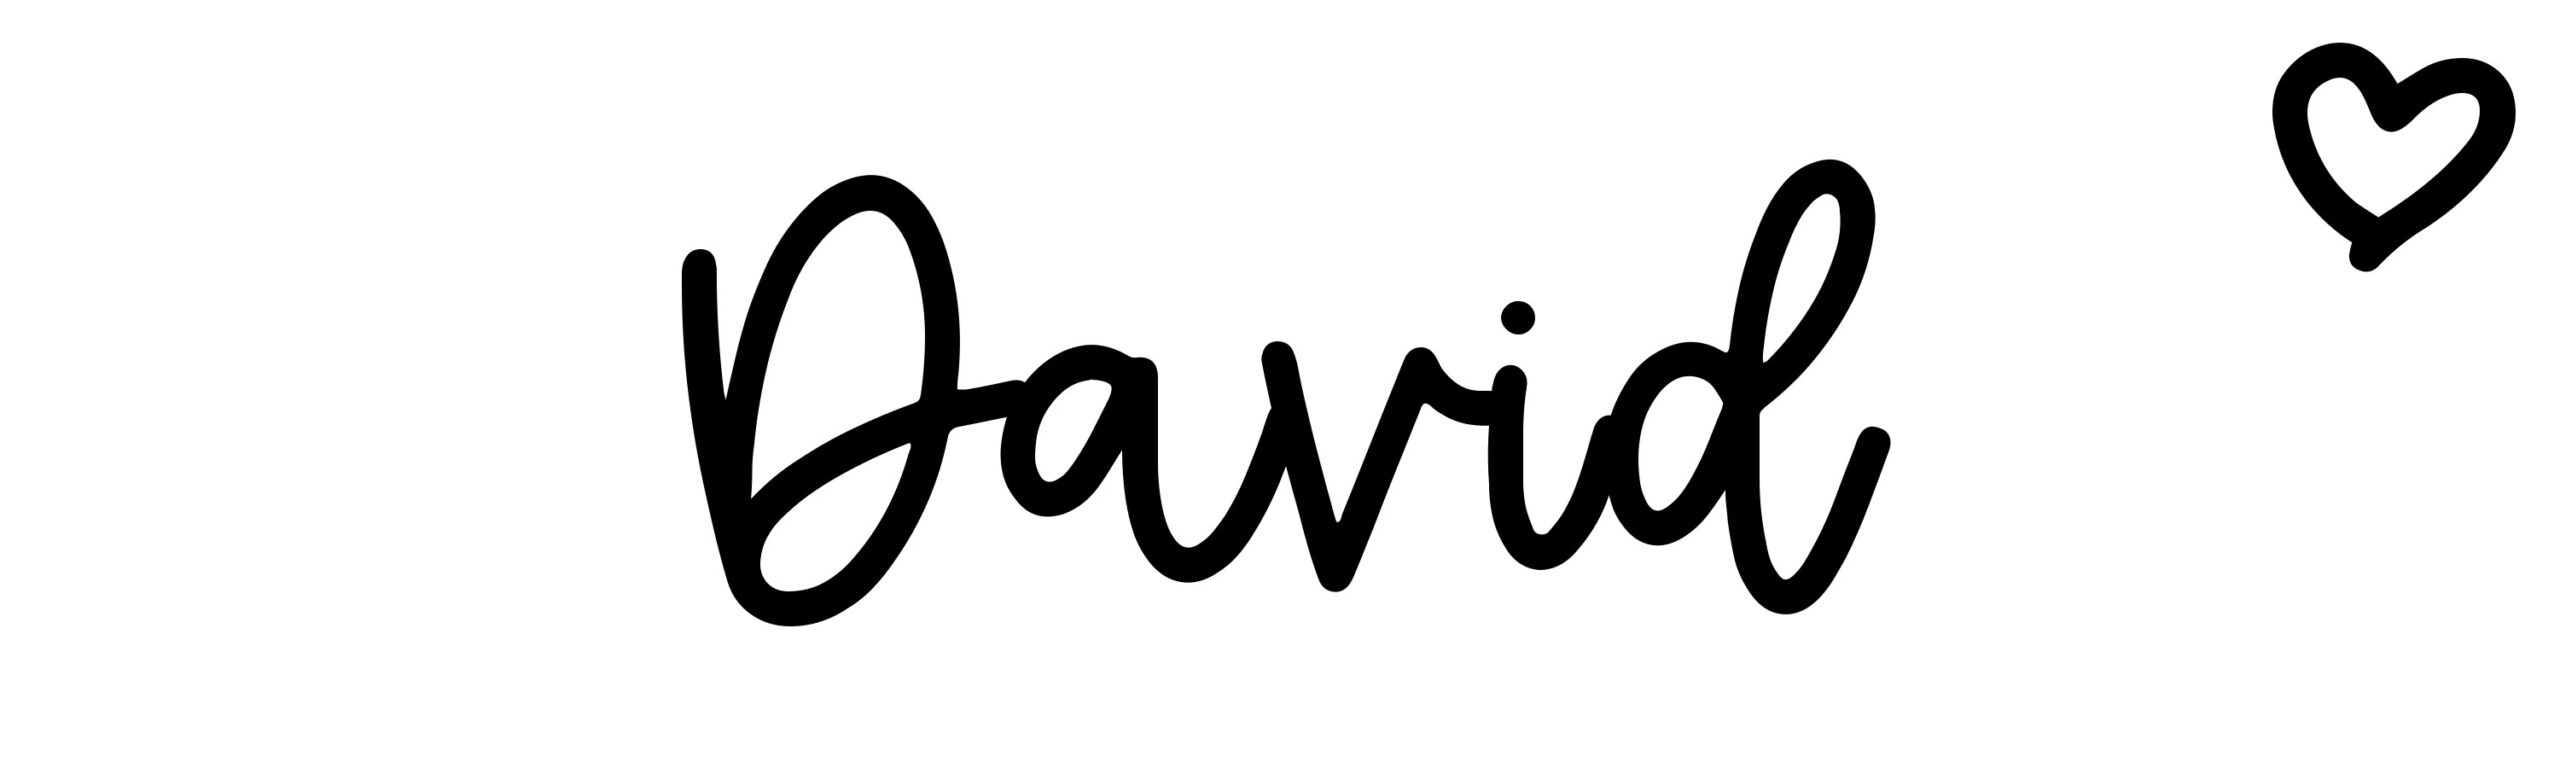 David - Name meaning, origin, variations and more